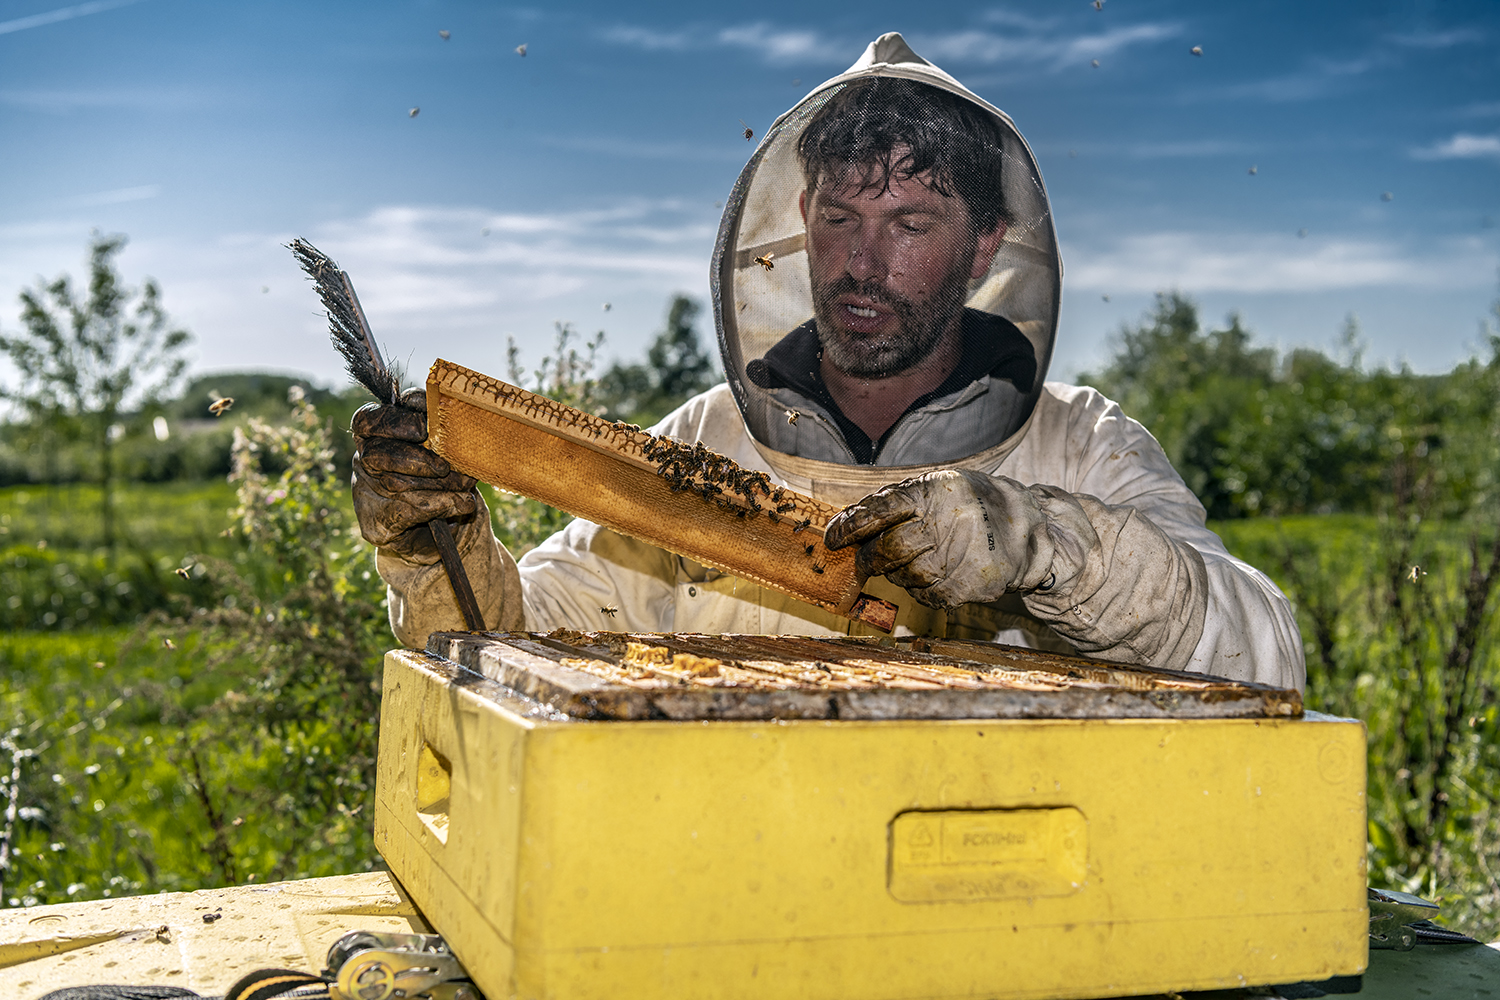 Peter the beekeeper cleans a honeycomb